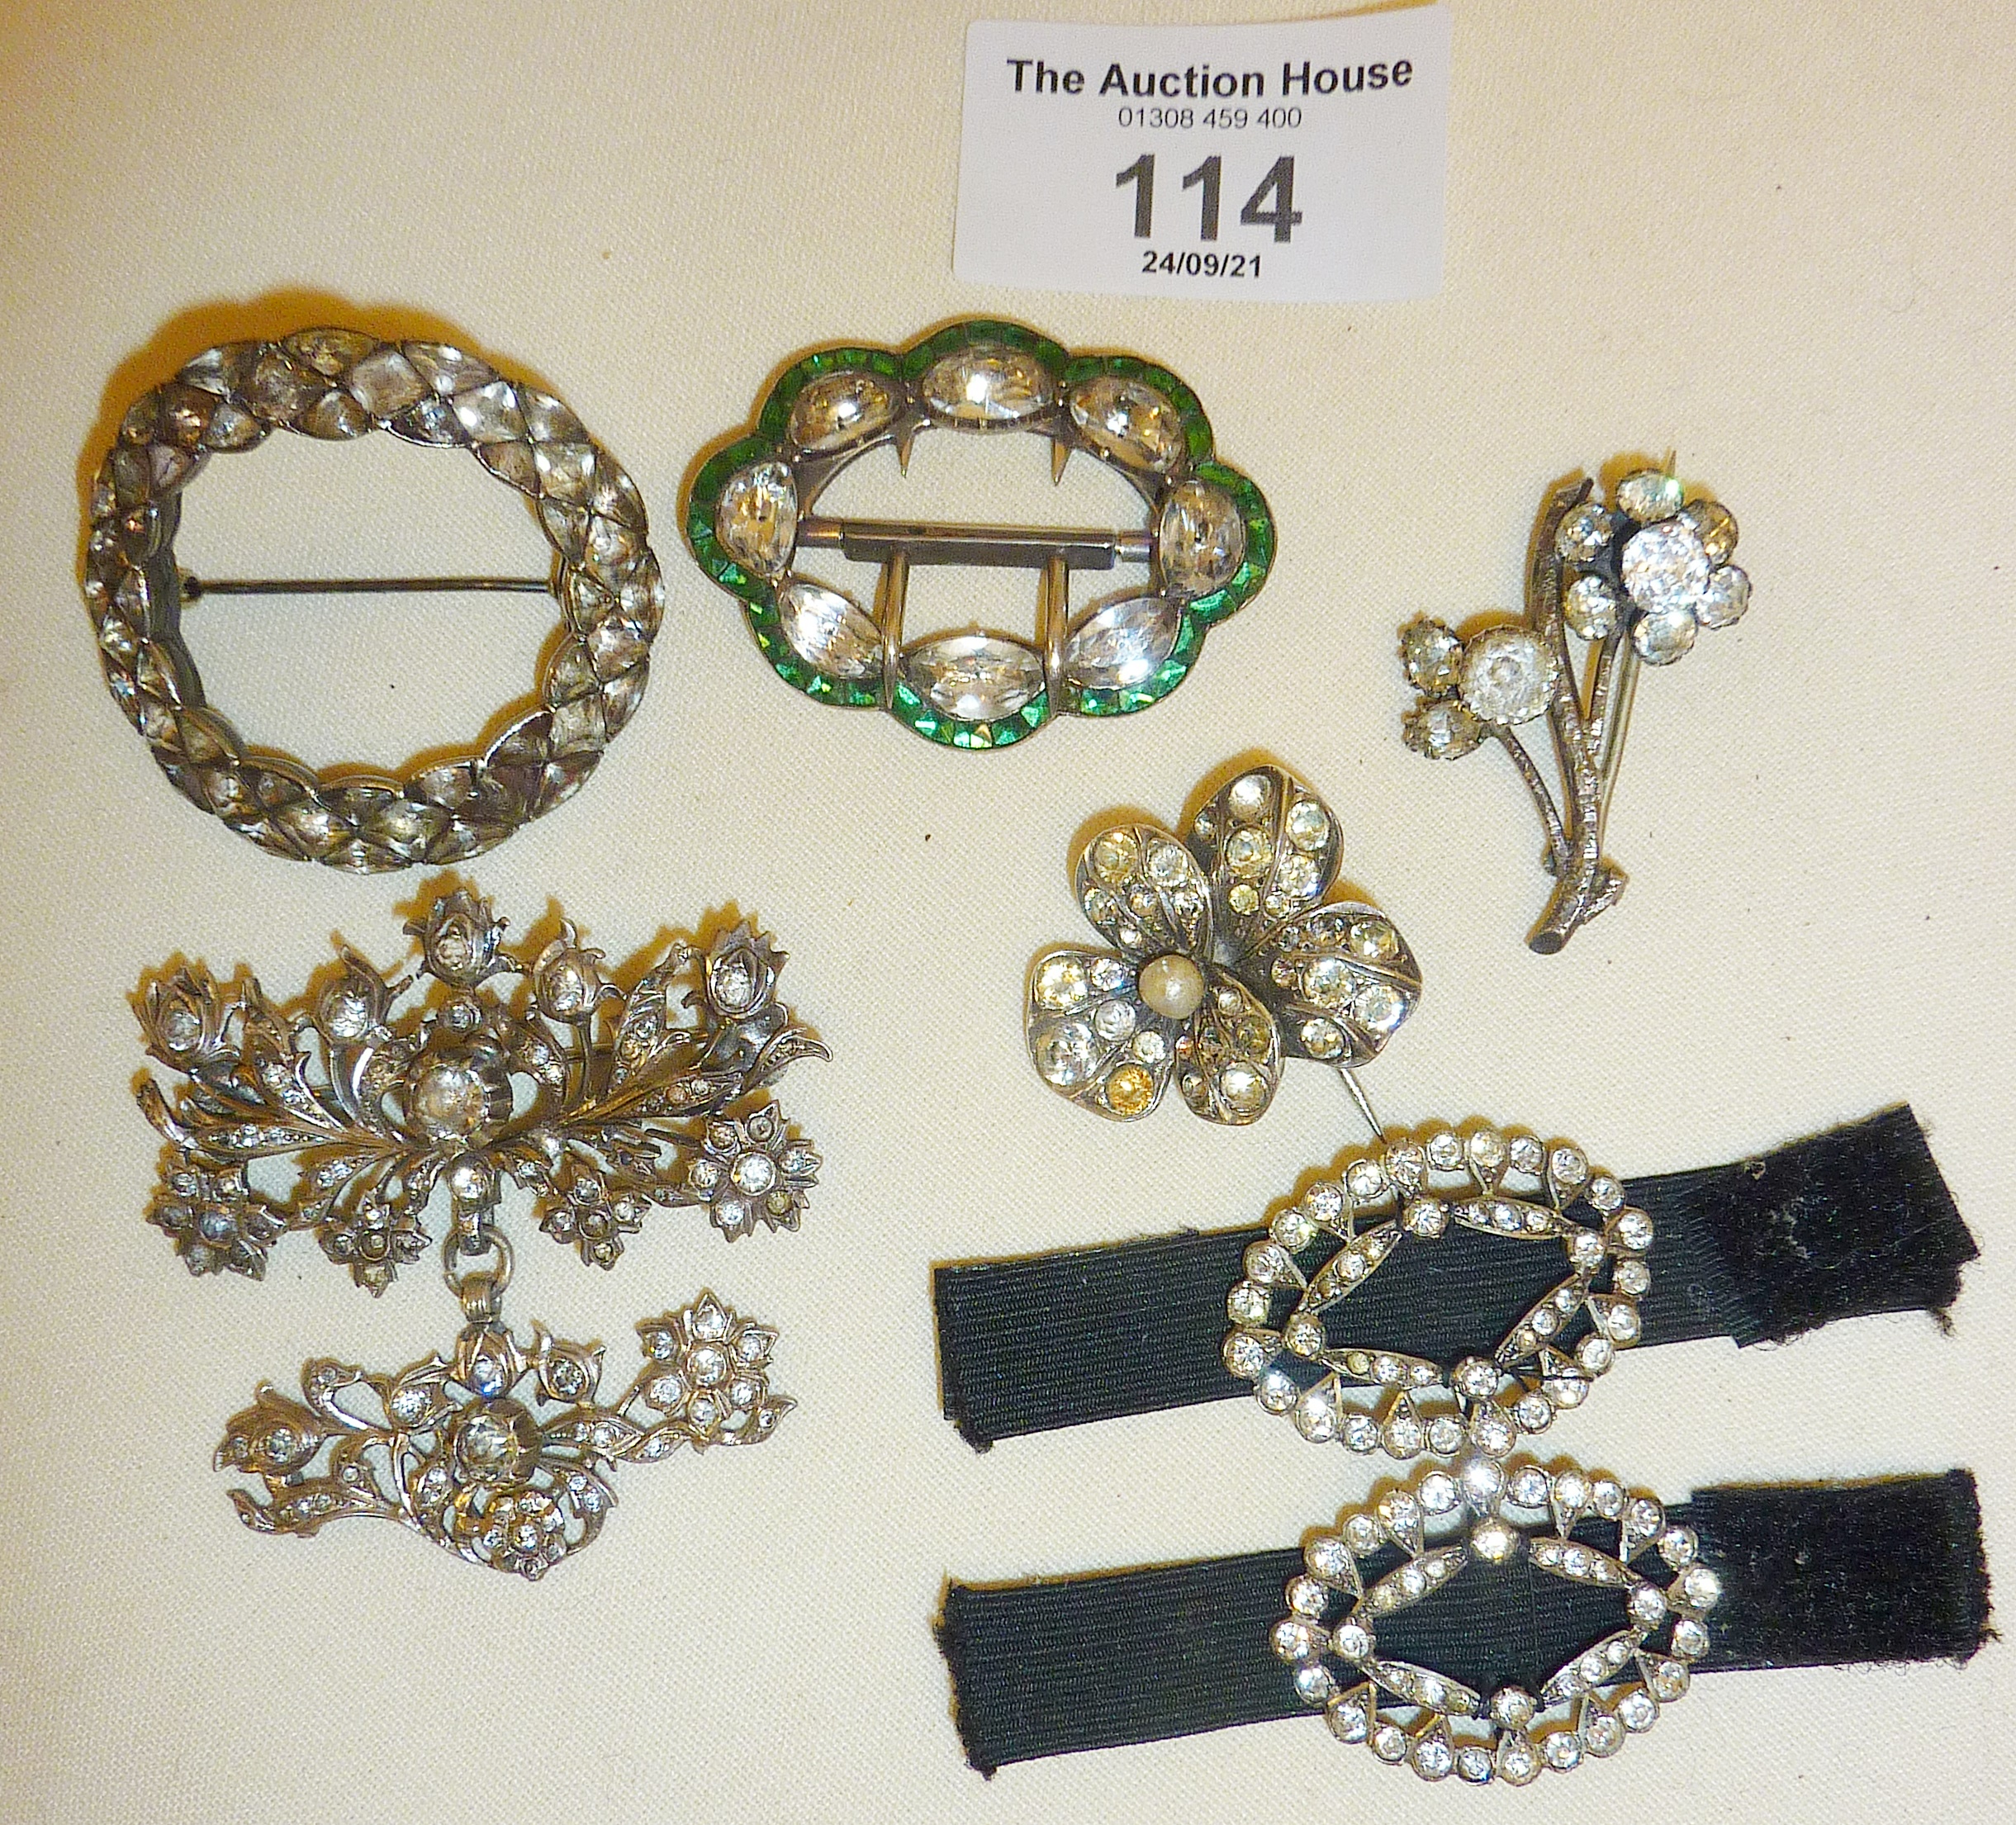 Silver and white metal jewellery: brooches and buckles, inc. one Lavaliere style